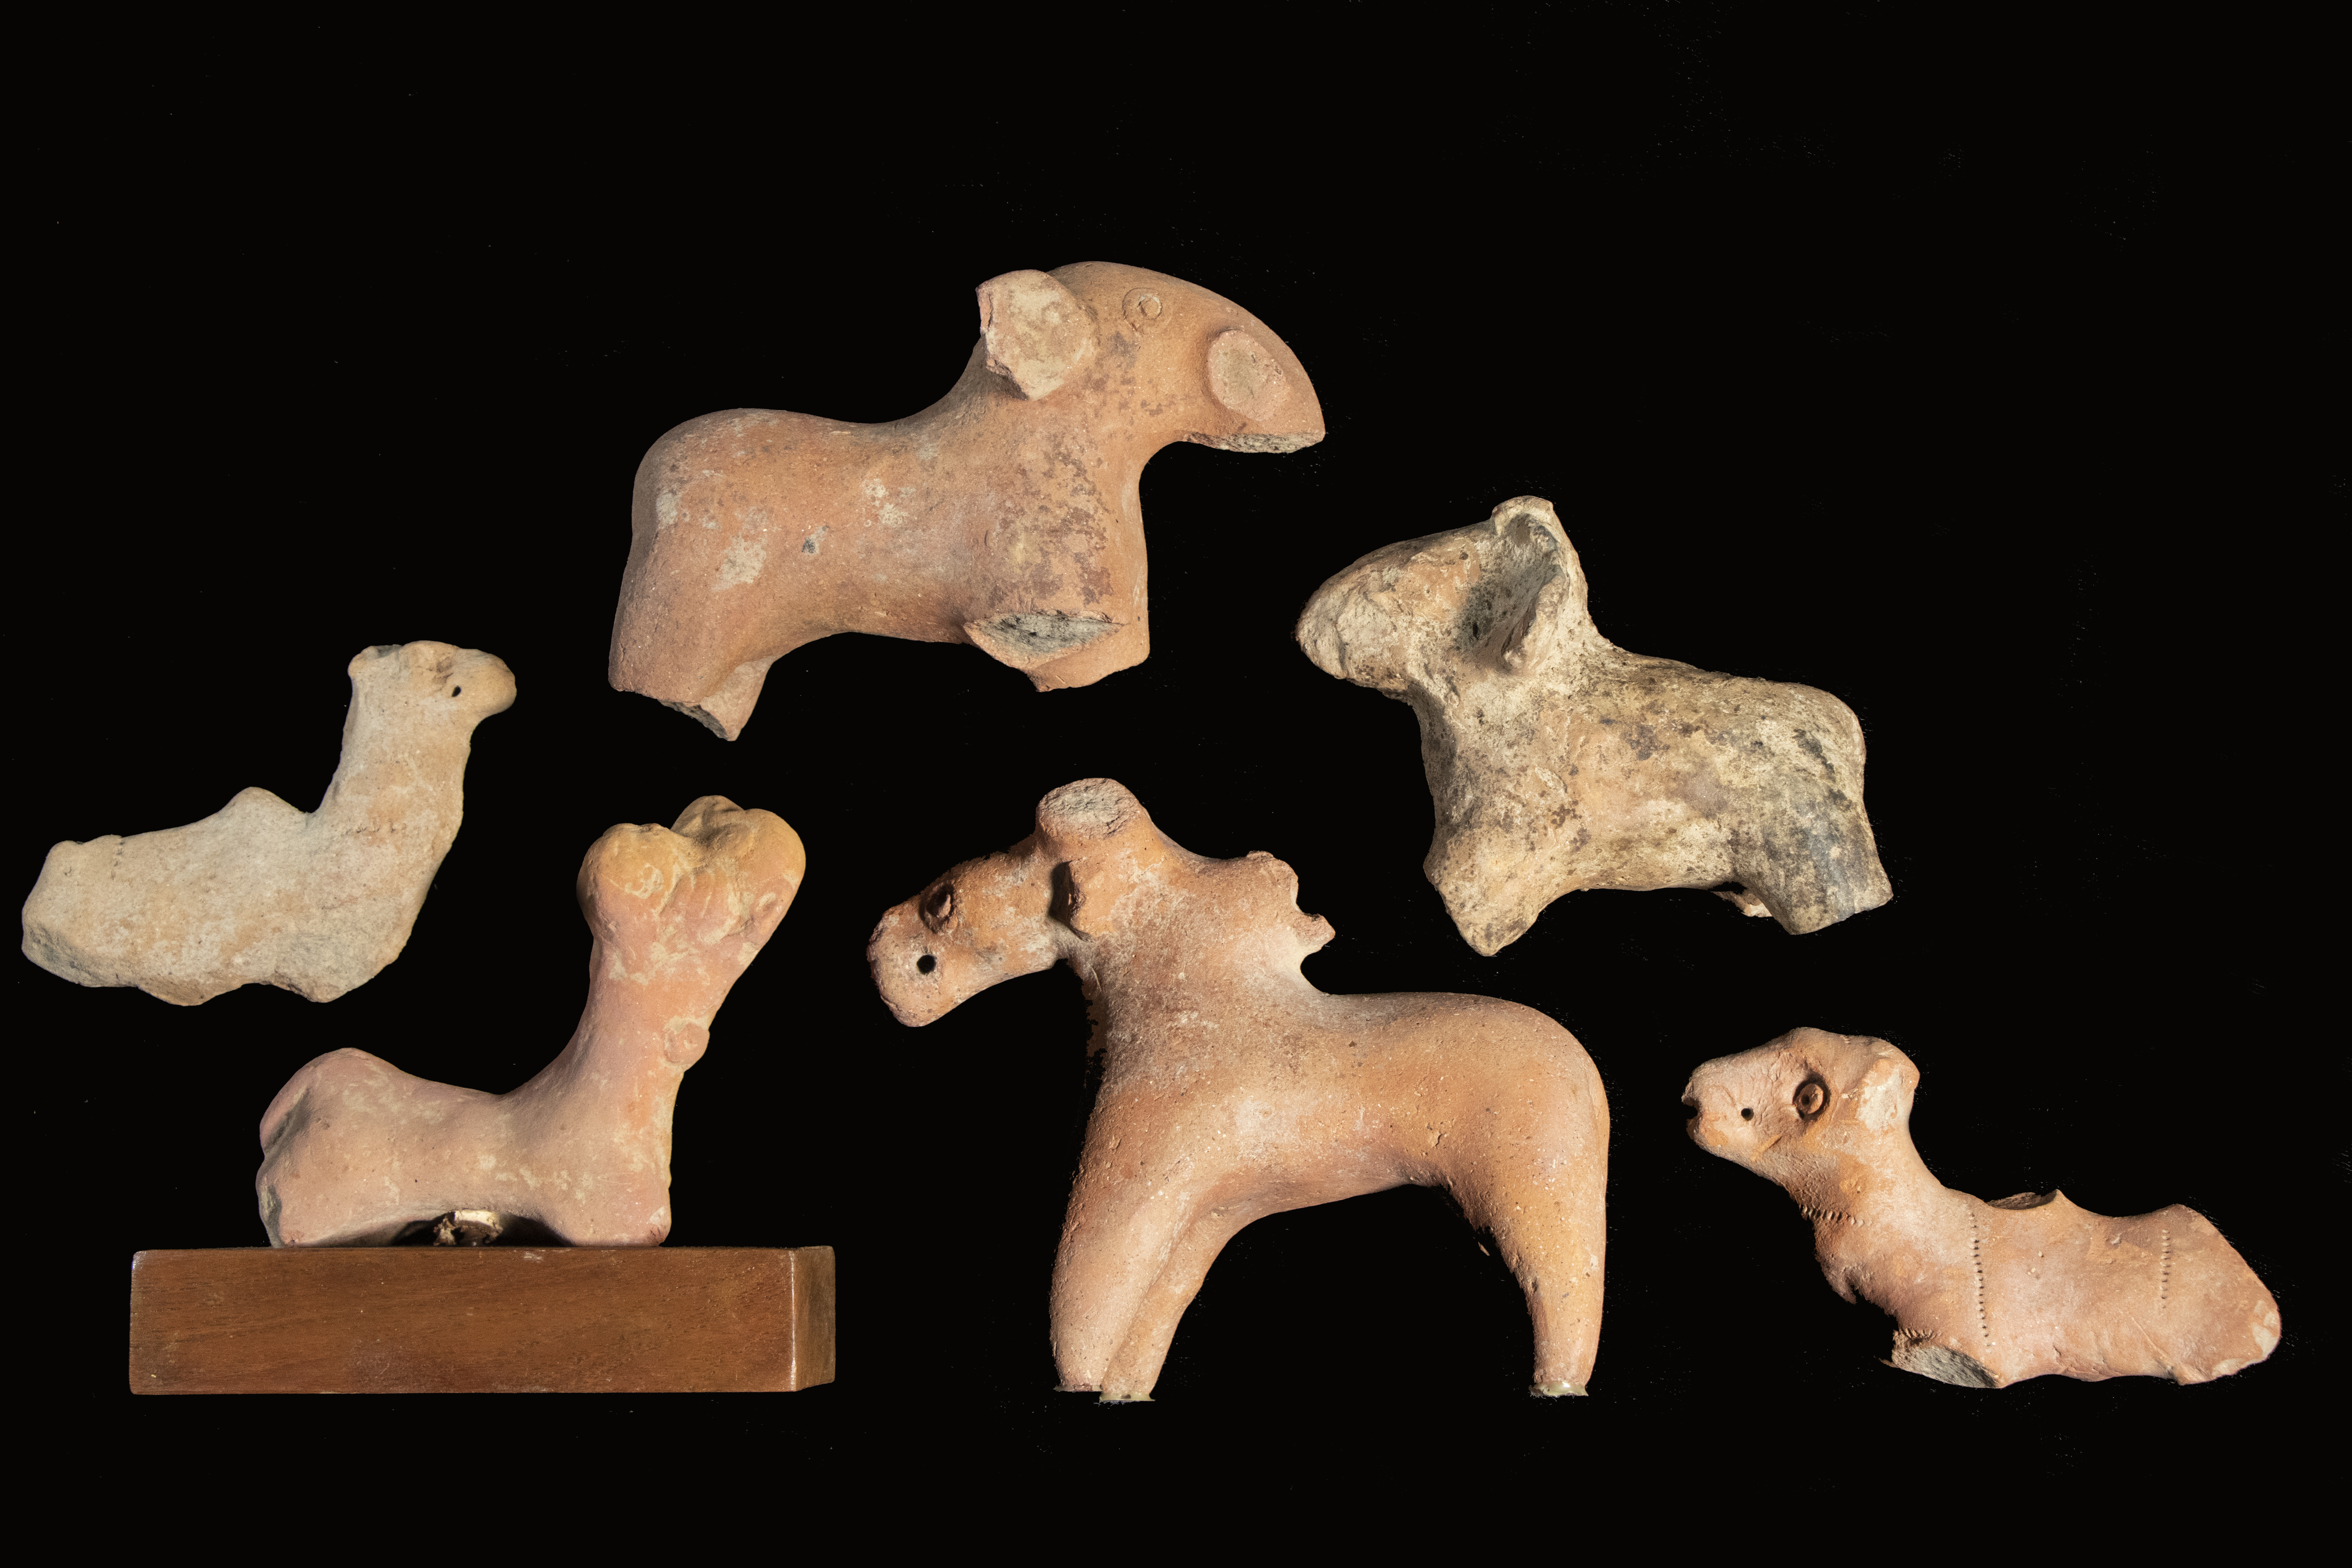  6 INDUS VALLEY POTTERY MODELS 302668